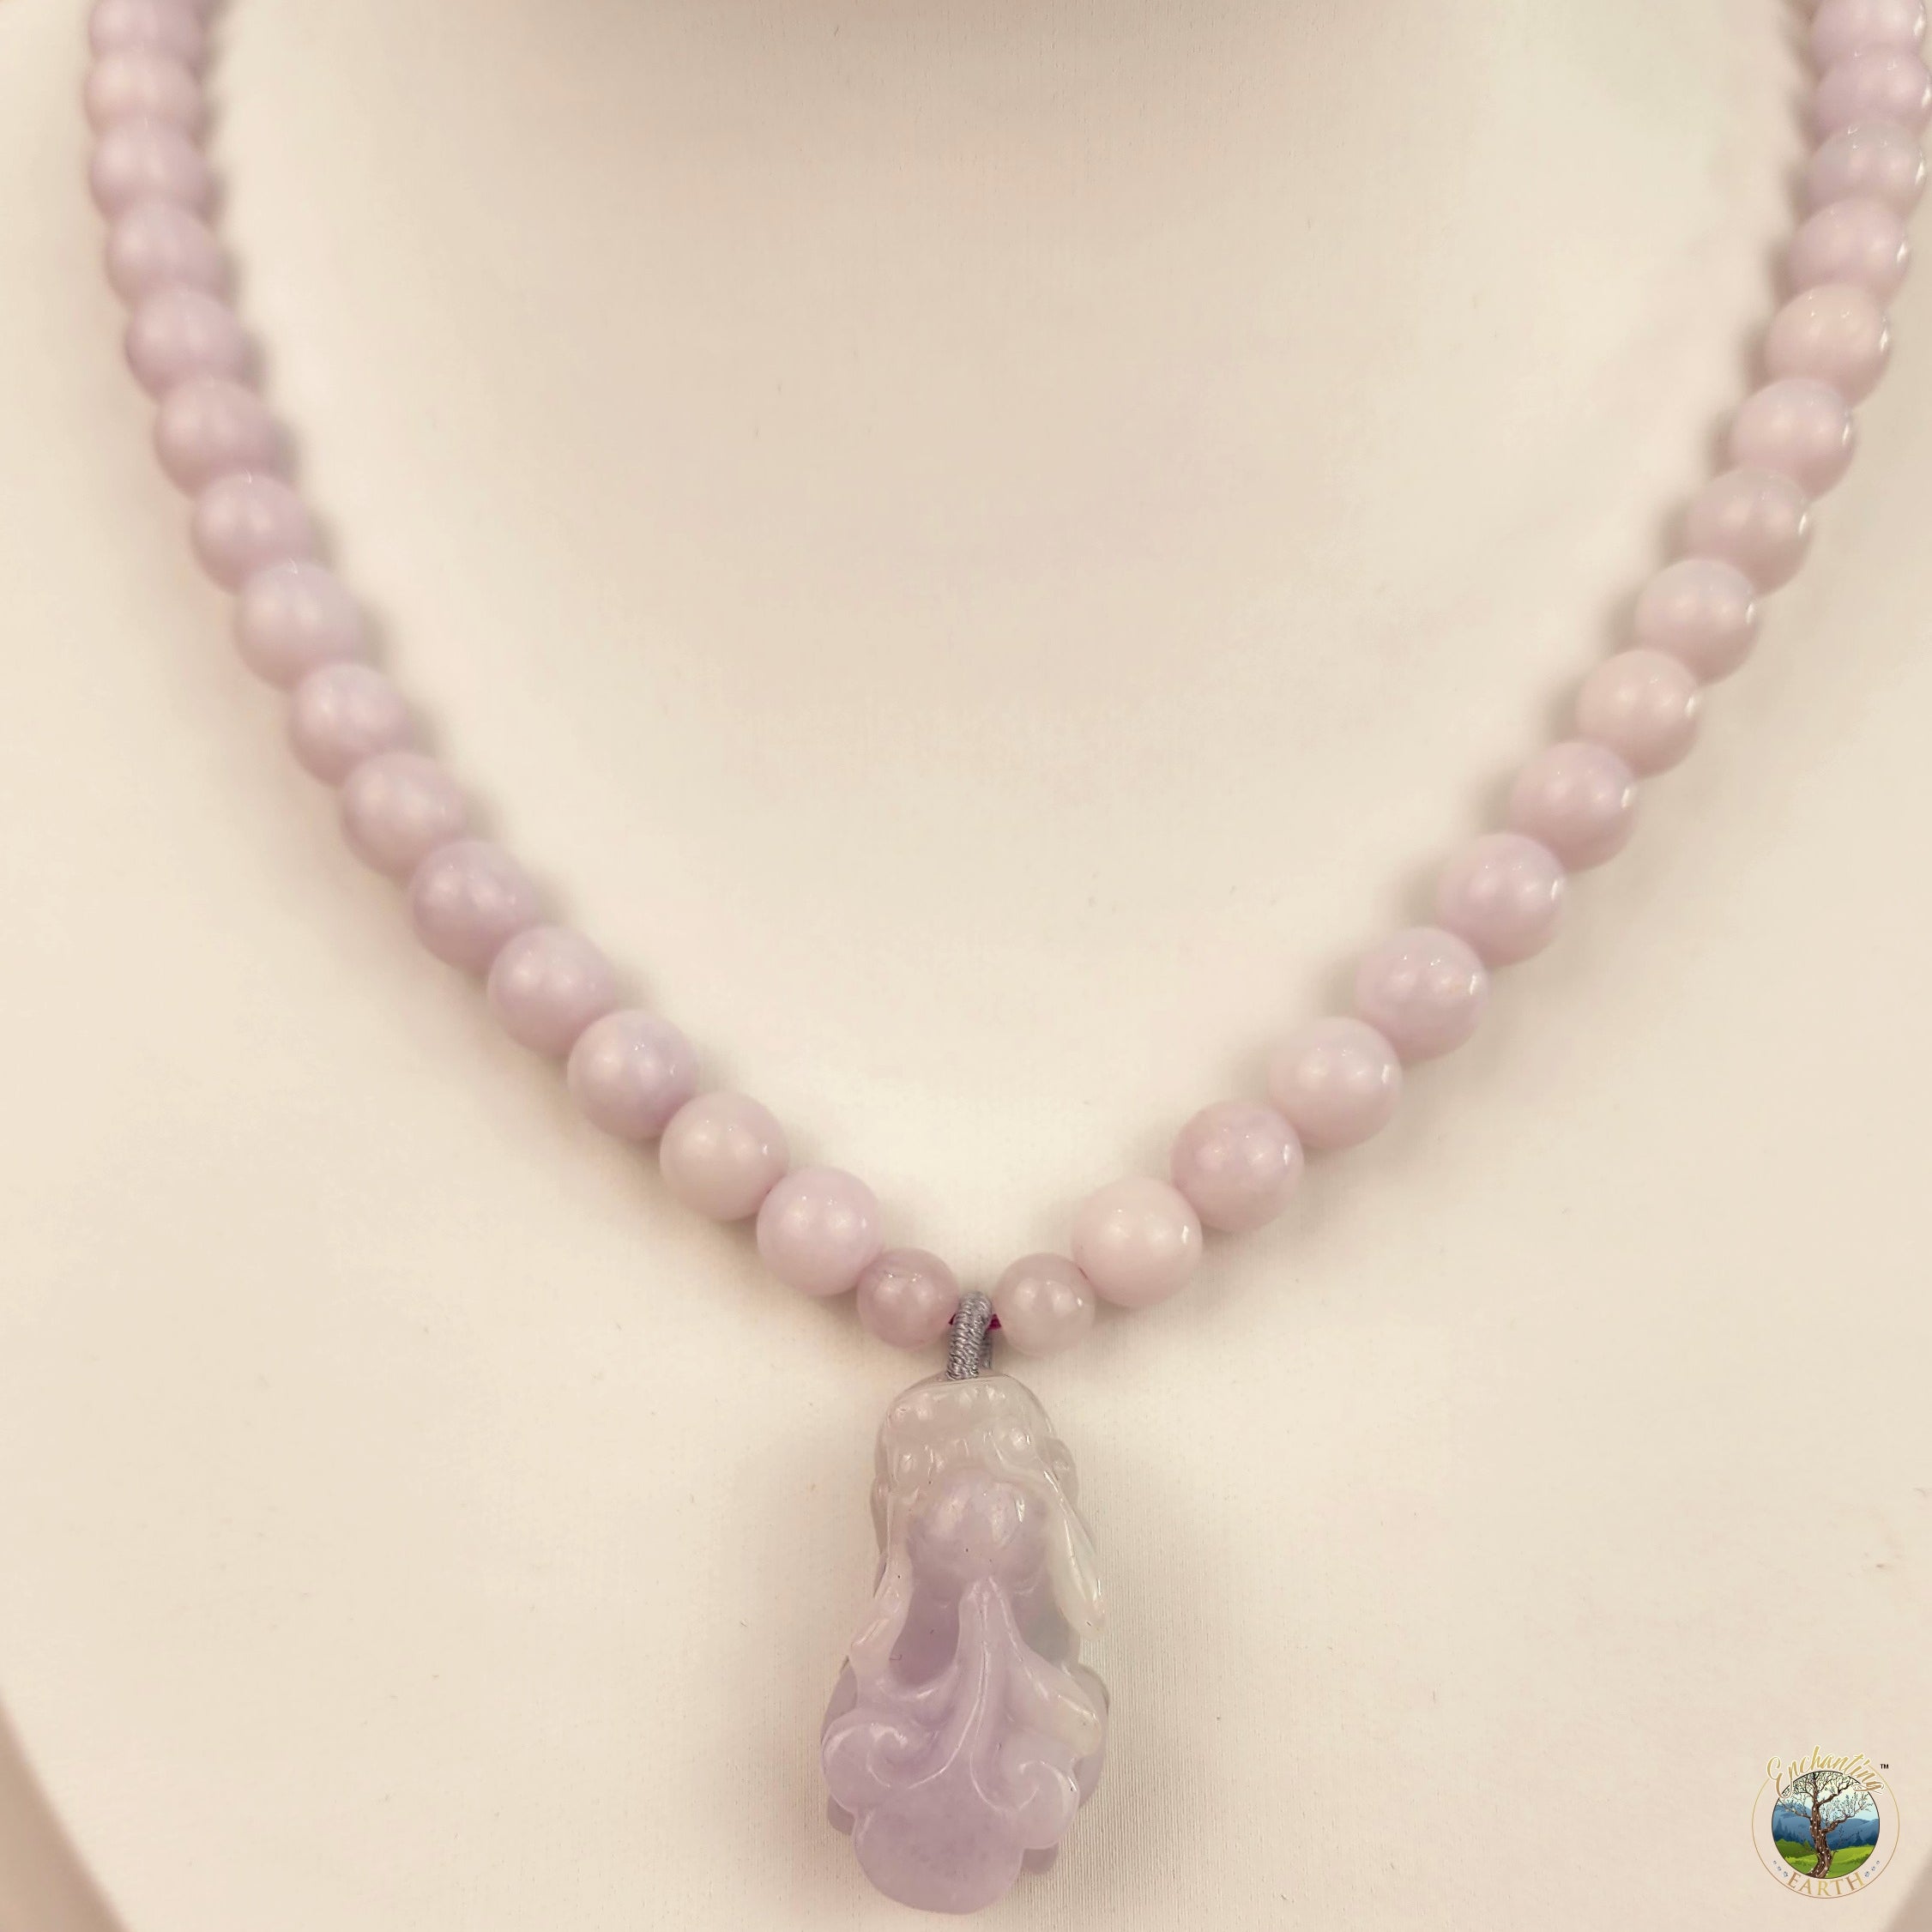 Lavender Jade Pixiu Necklace for Acceptance and Serenity